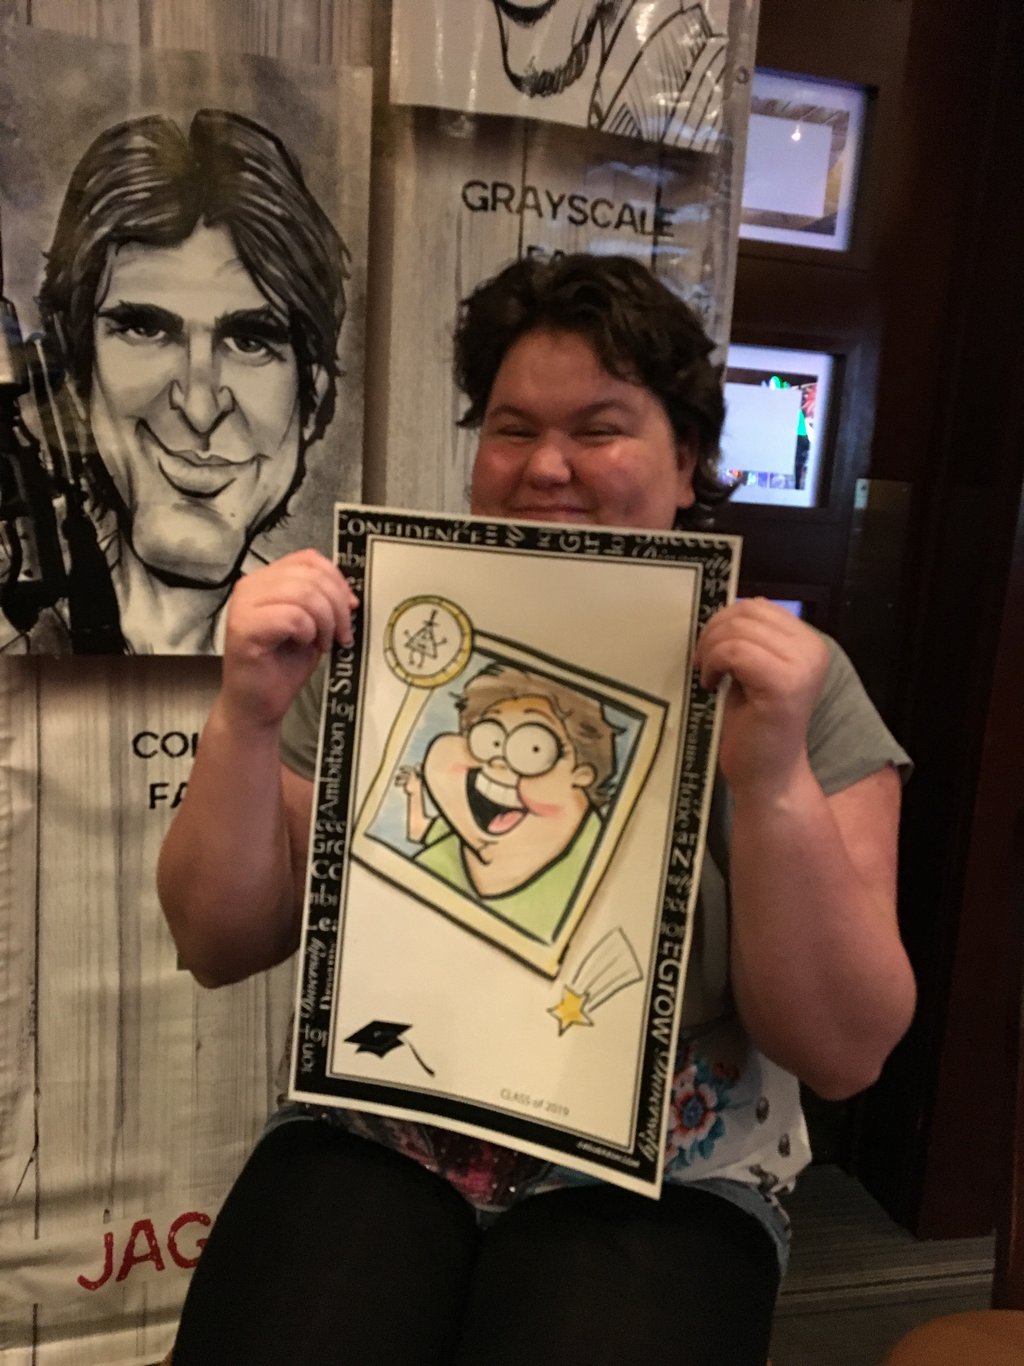 Northern California's caricature artist JAGuerzon entertains graduates with cartoons and laughs in Roseville, California.